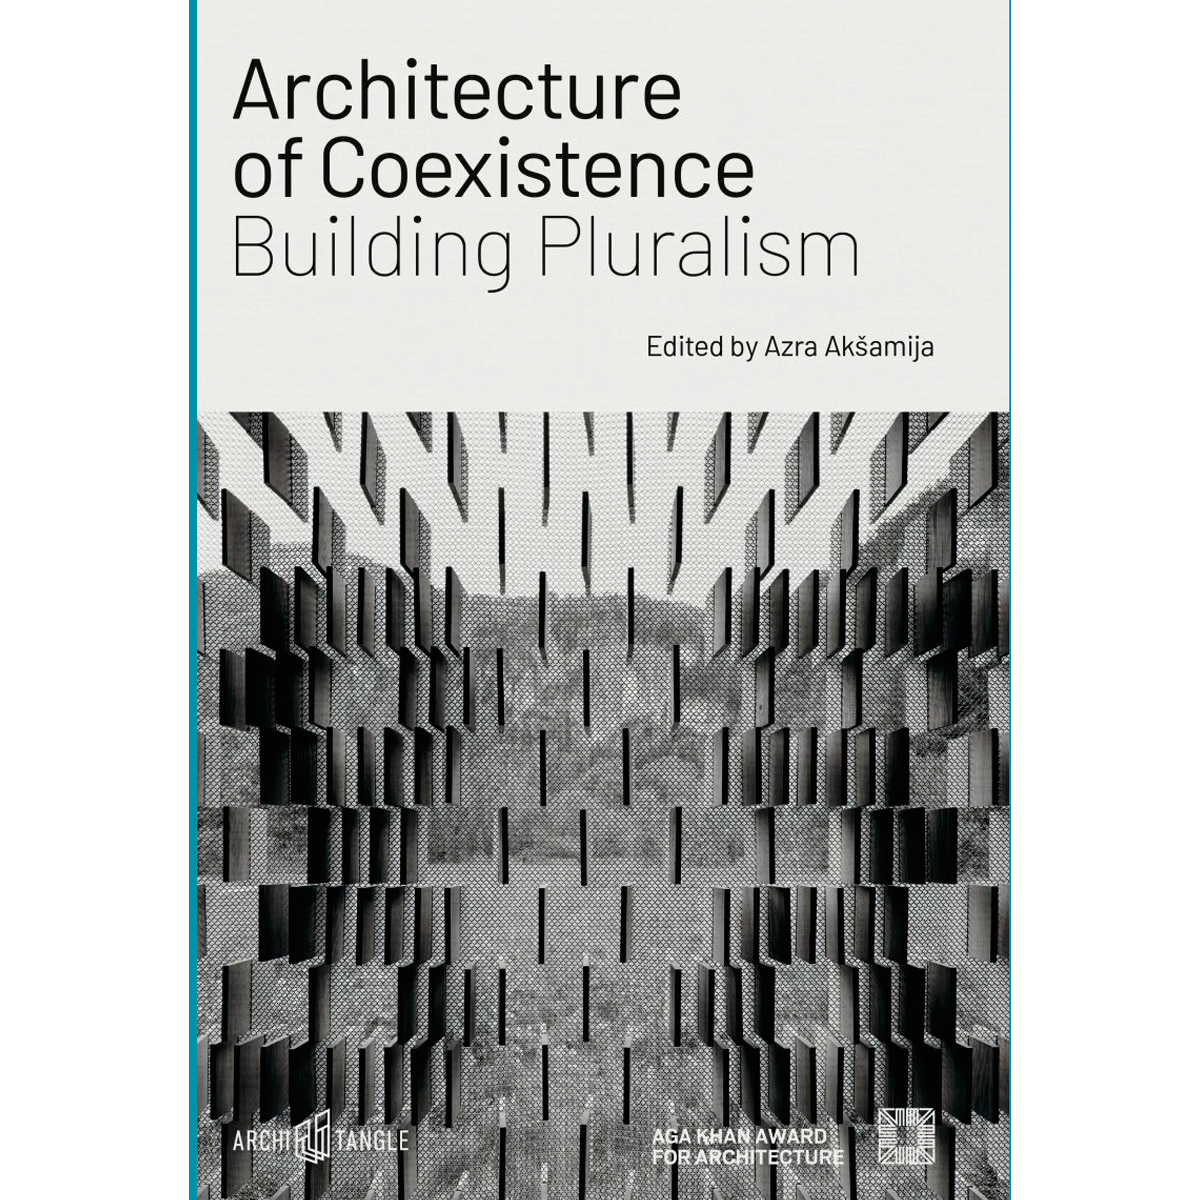 Architecture of Coexistence